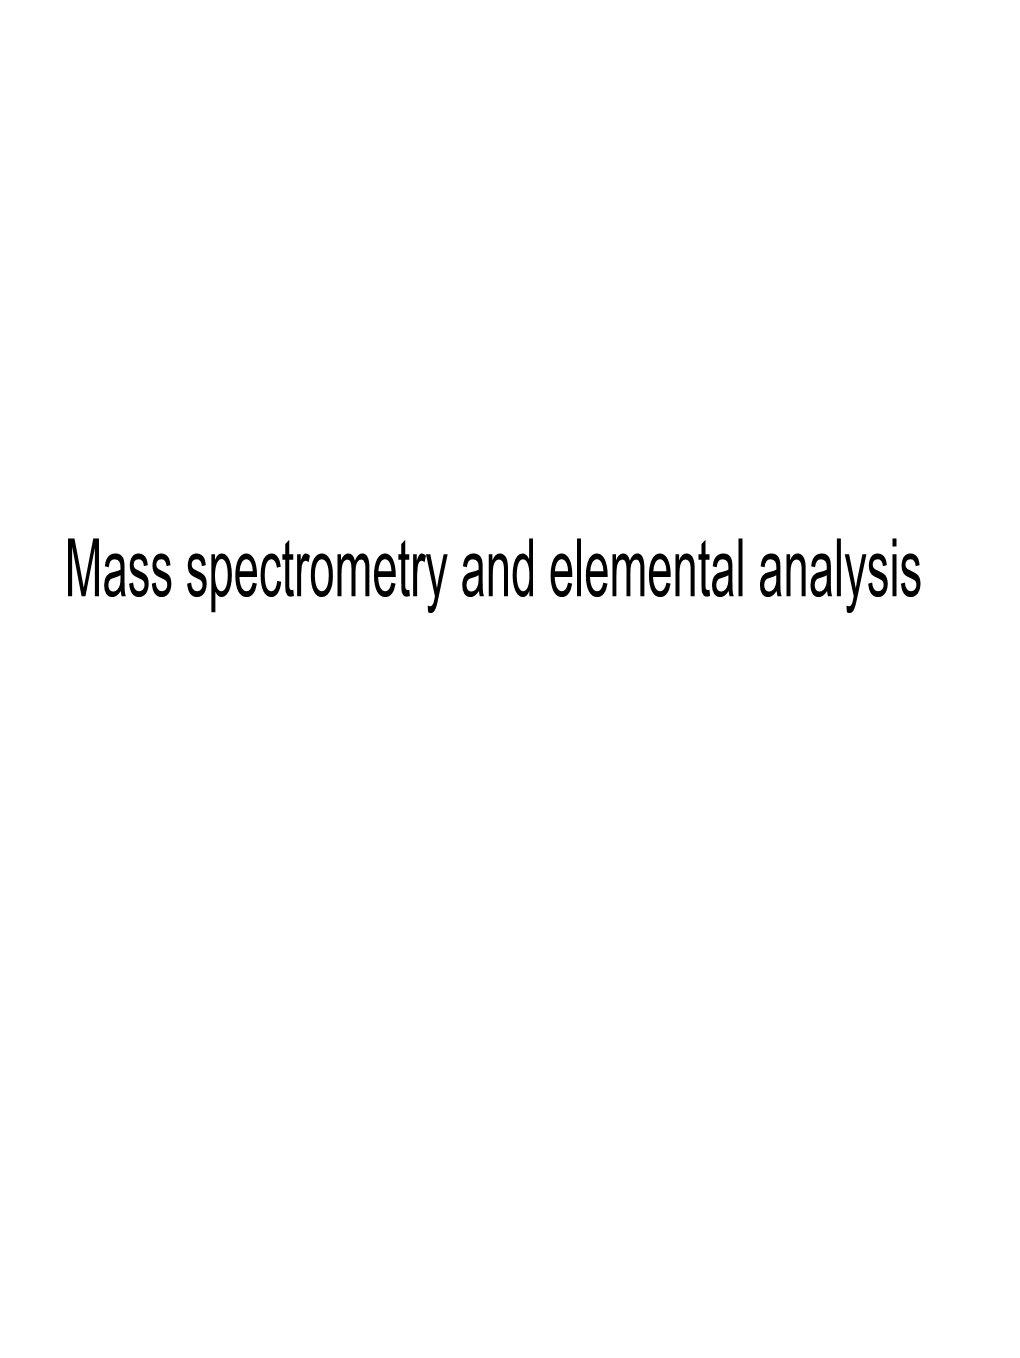 A Schematic Representation of a Single-Focusing Mass Spectrometer With